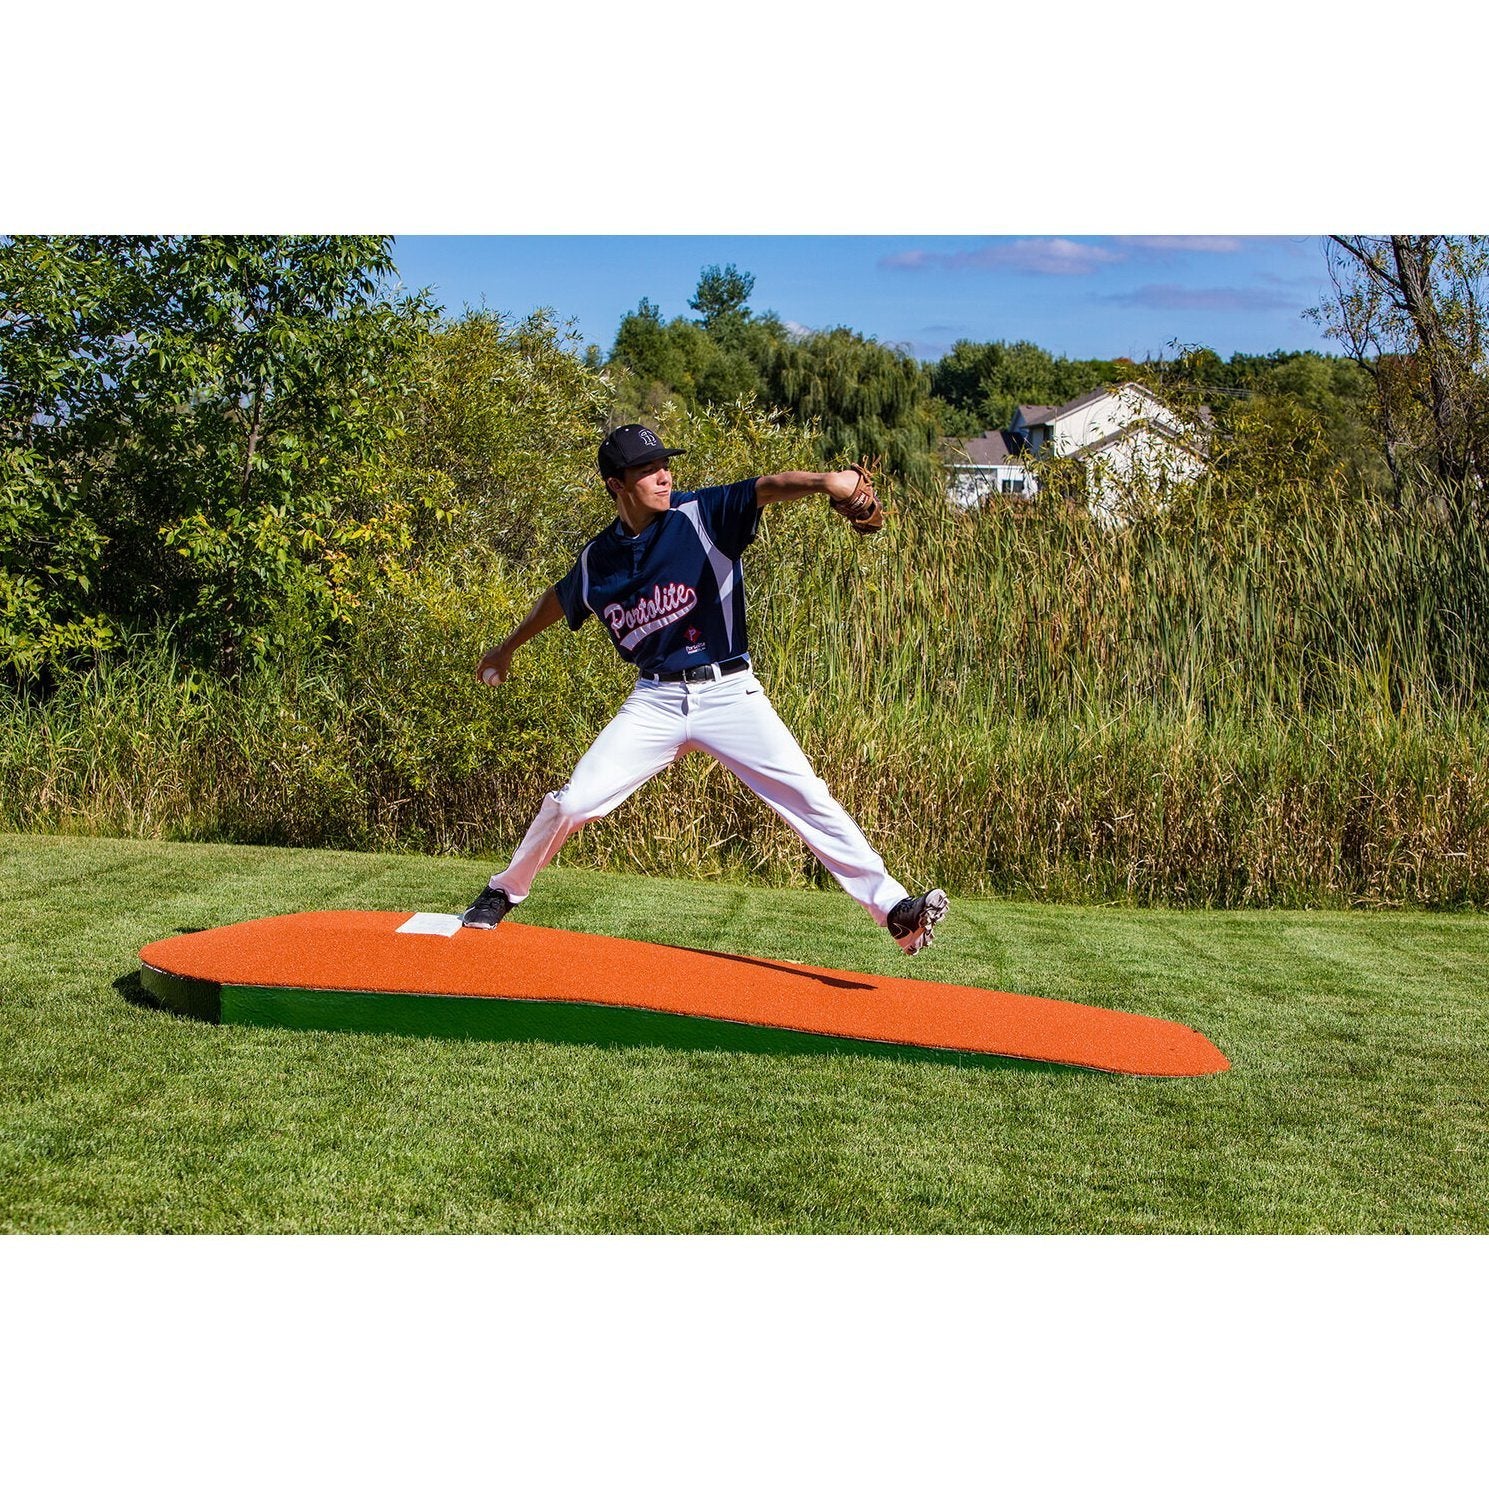 Portolite 10" Full Size Portable Practice Pitching Mound clay side view pitcher on mound